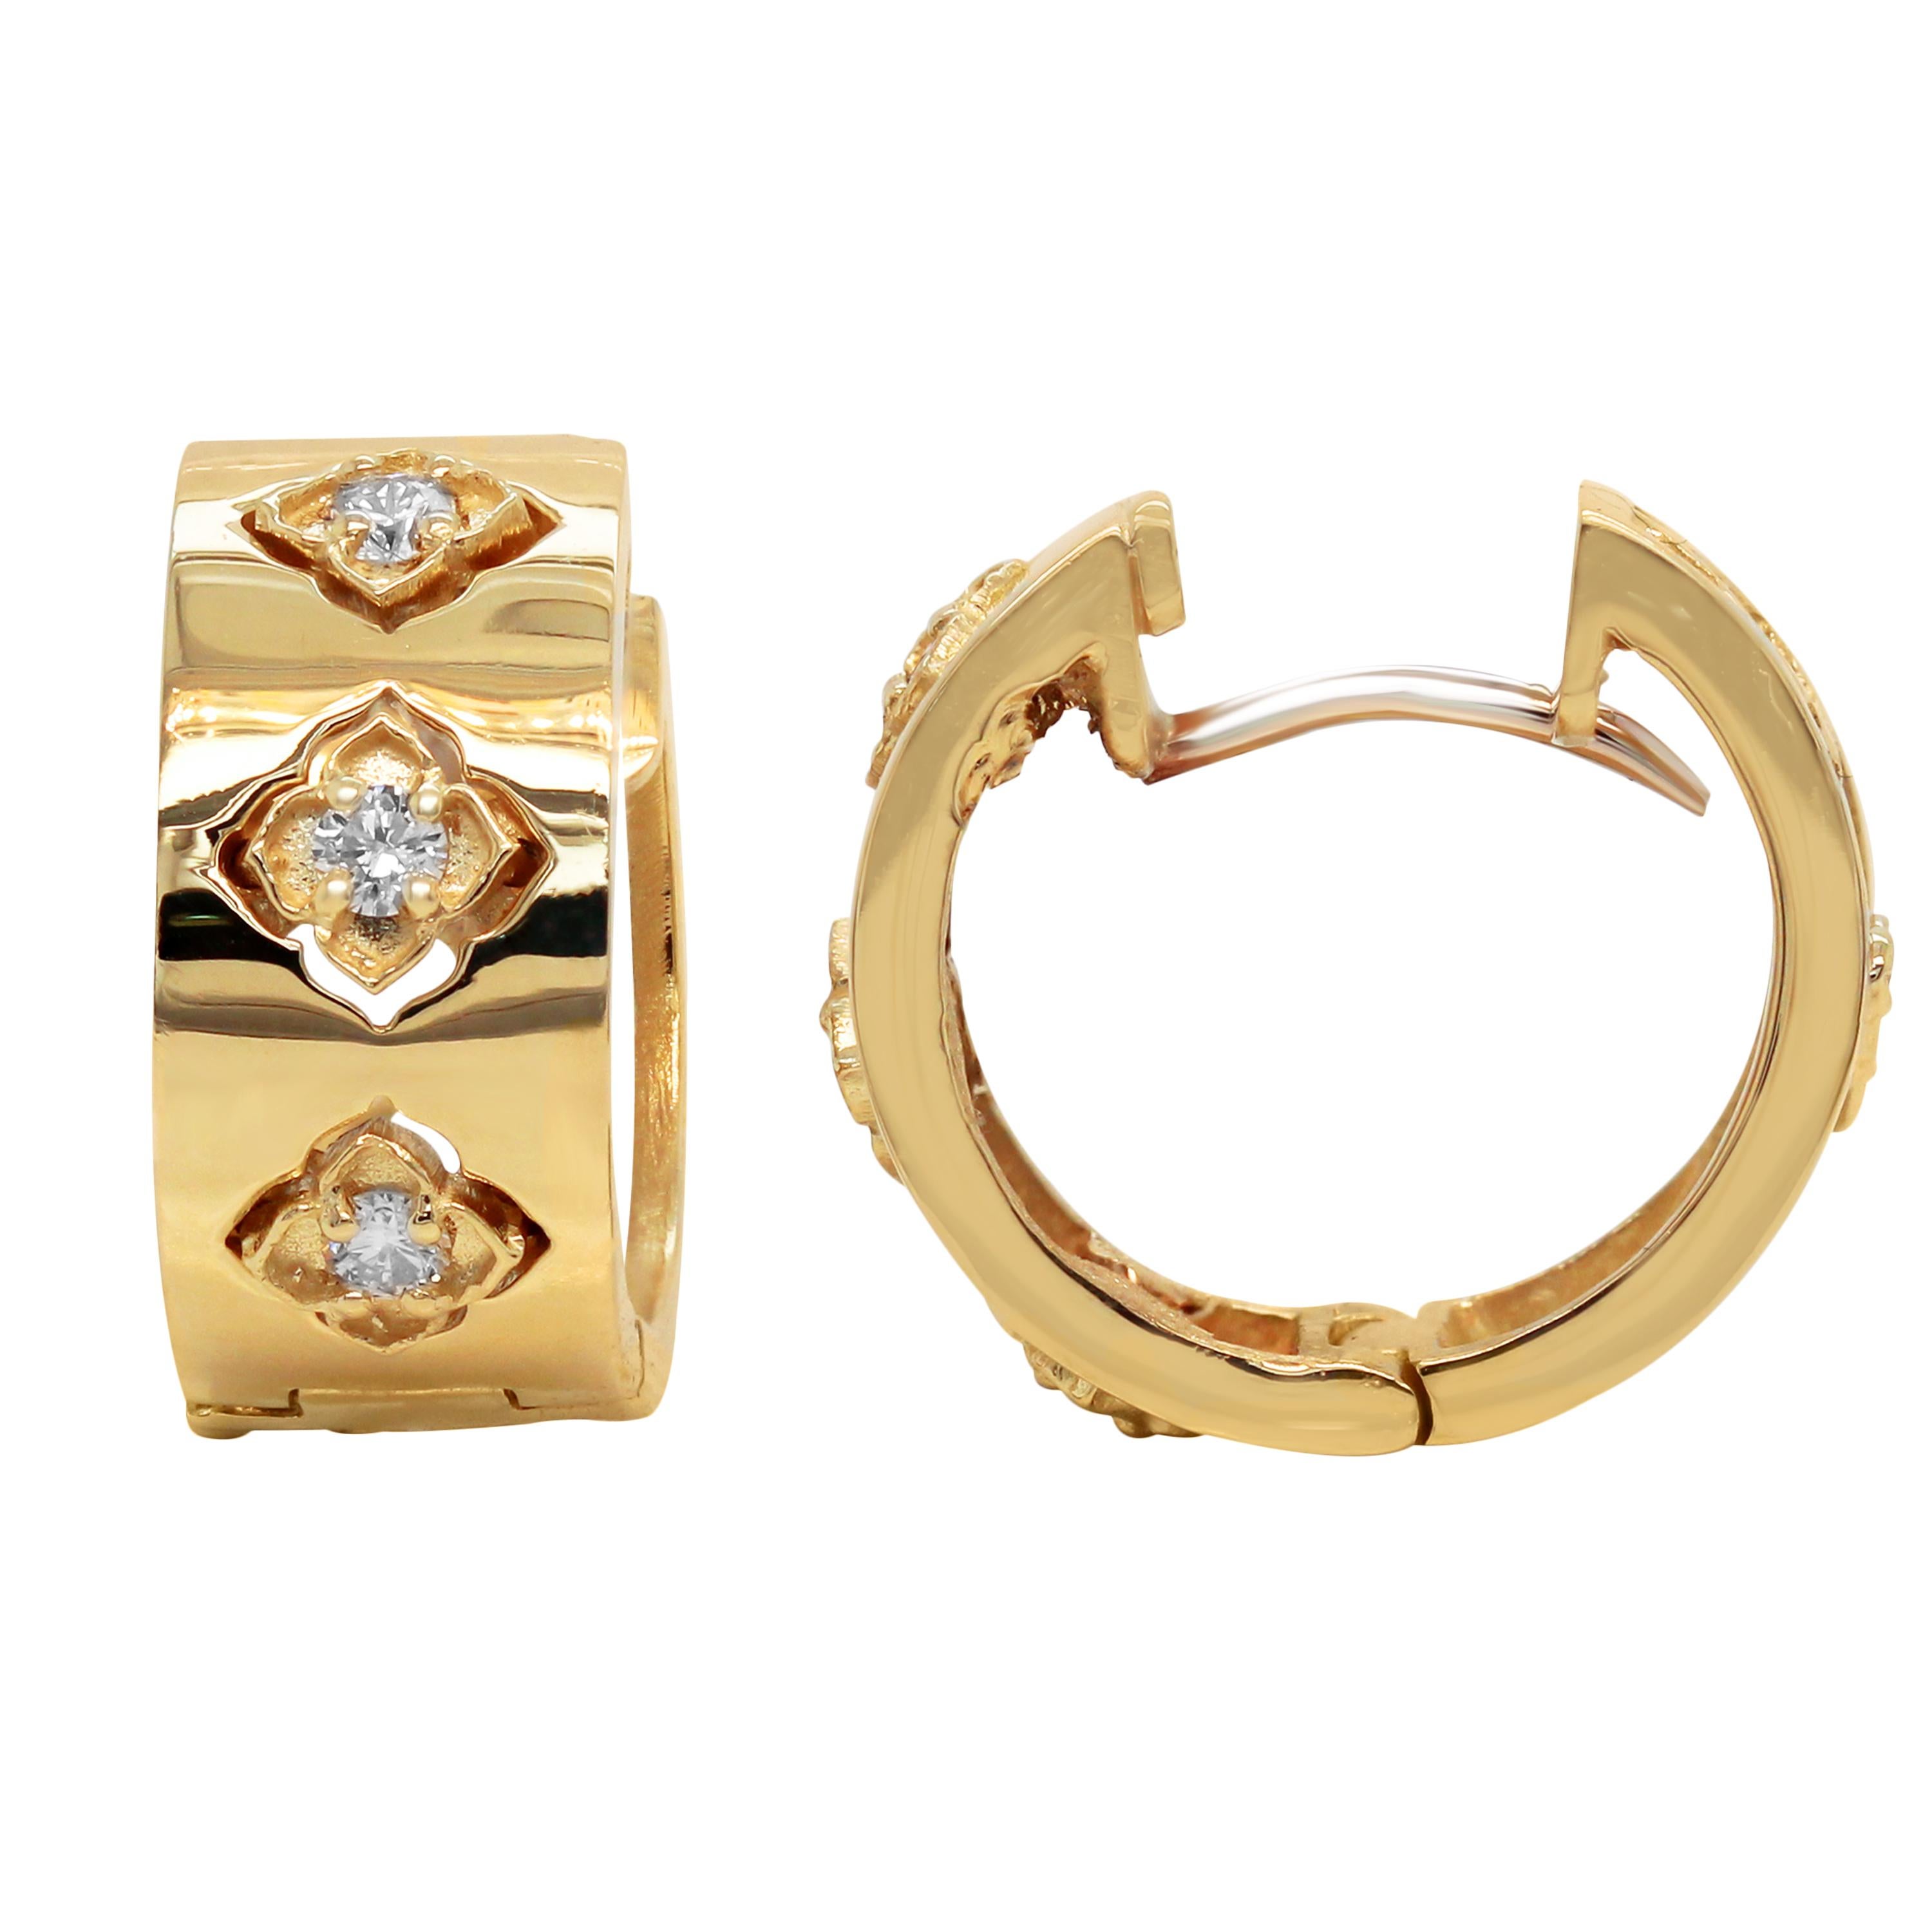 Stambolian 18K High Polished Shiny Yellow White Gold Diamond Huggie Earrings

From the 2021 collection, this pair of Stambolian huggie earrings have a shiny, high-polished finish with three diamond clusters set in the center.

The floral cluster